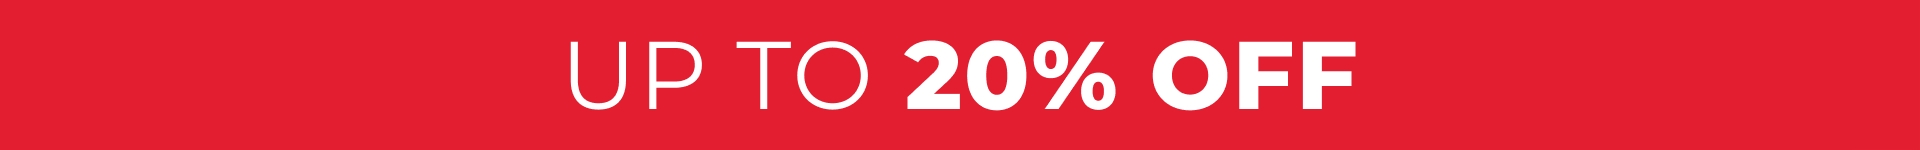 Up to 20% OFF